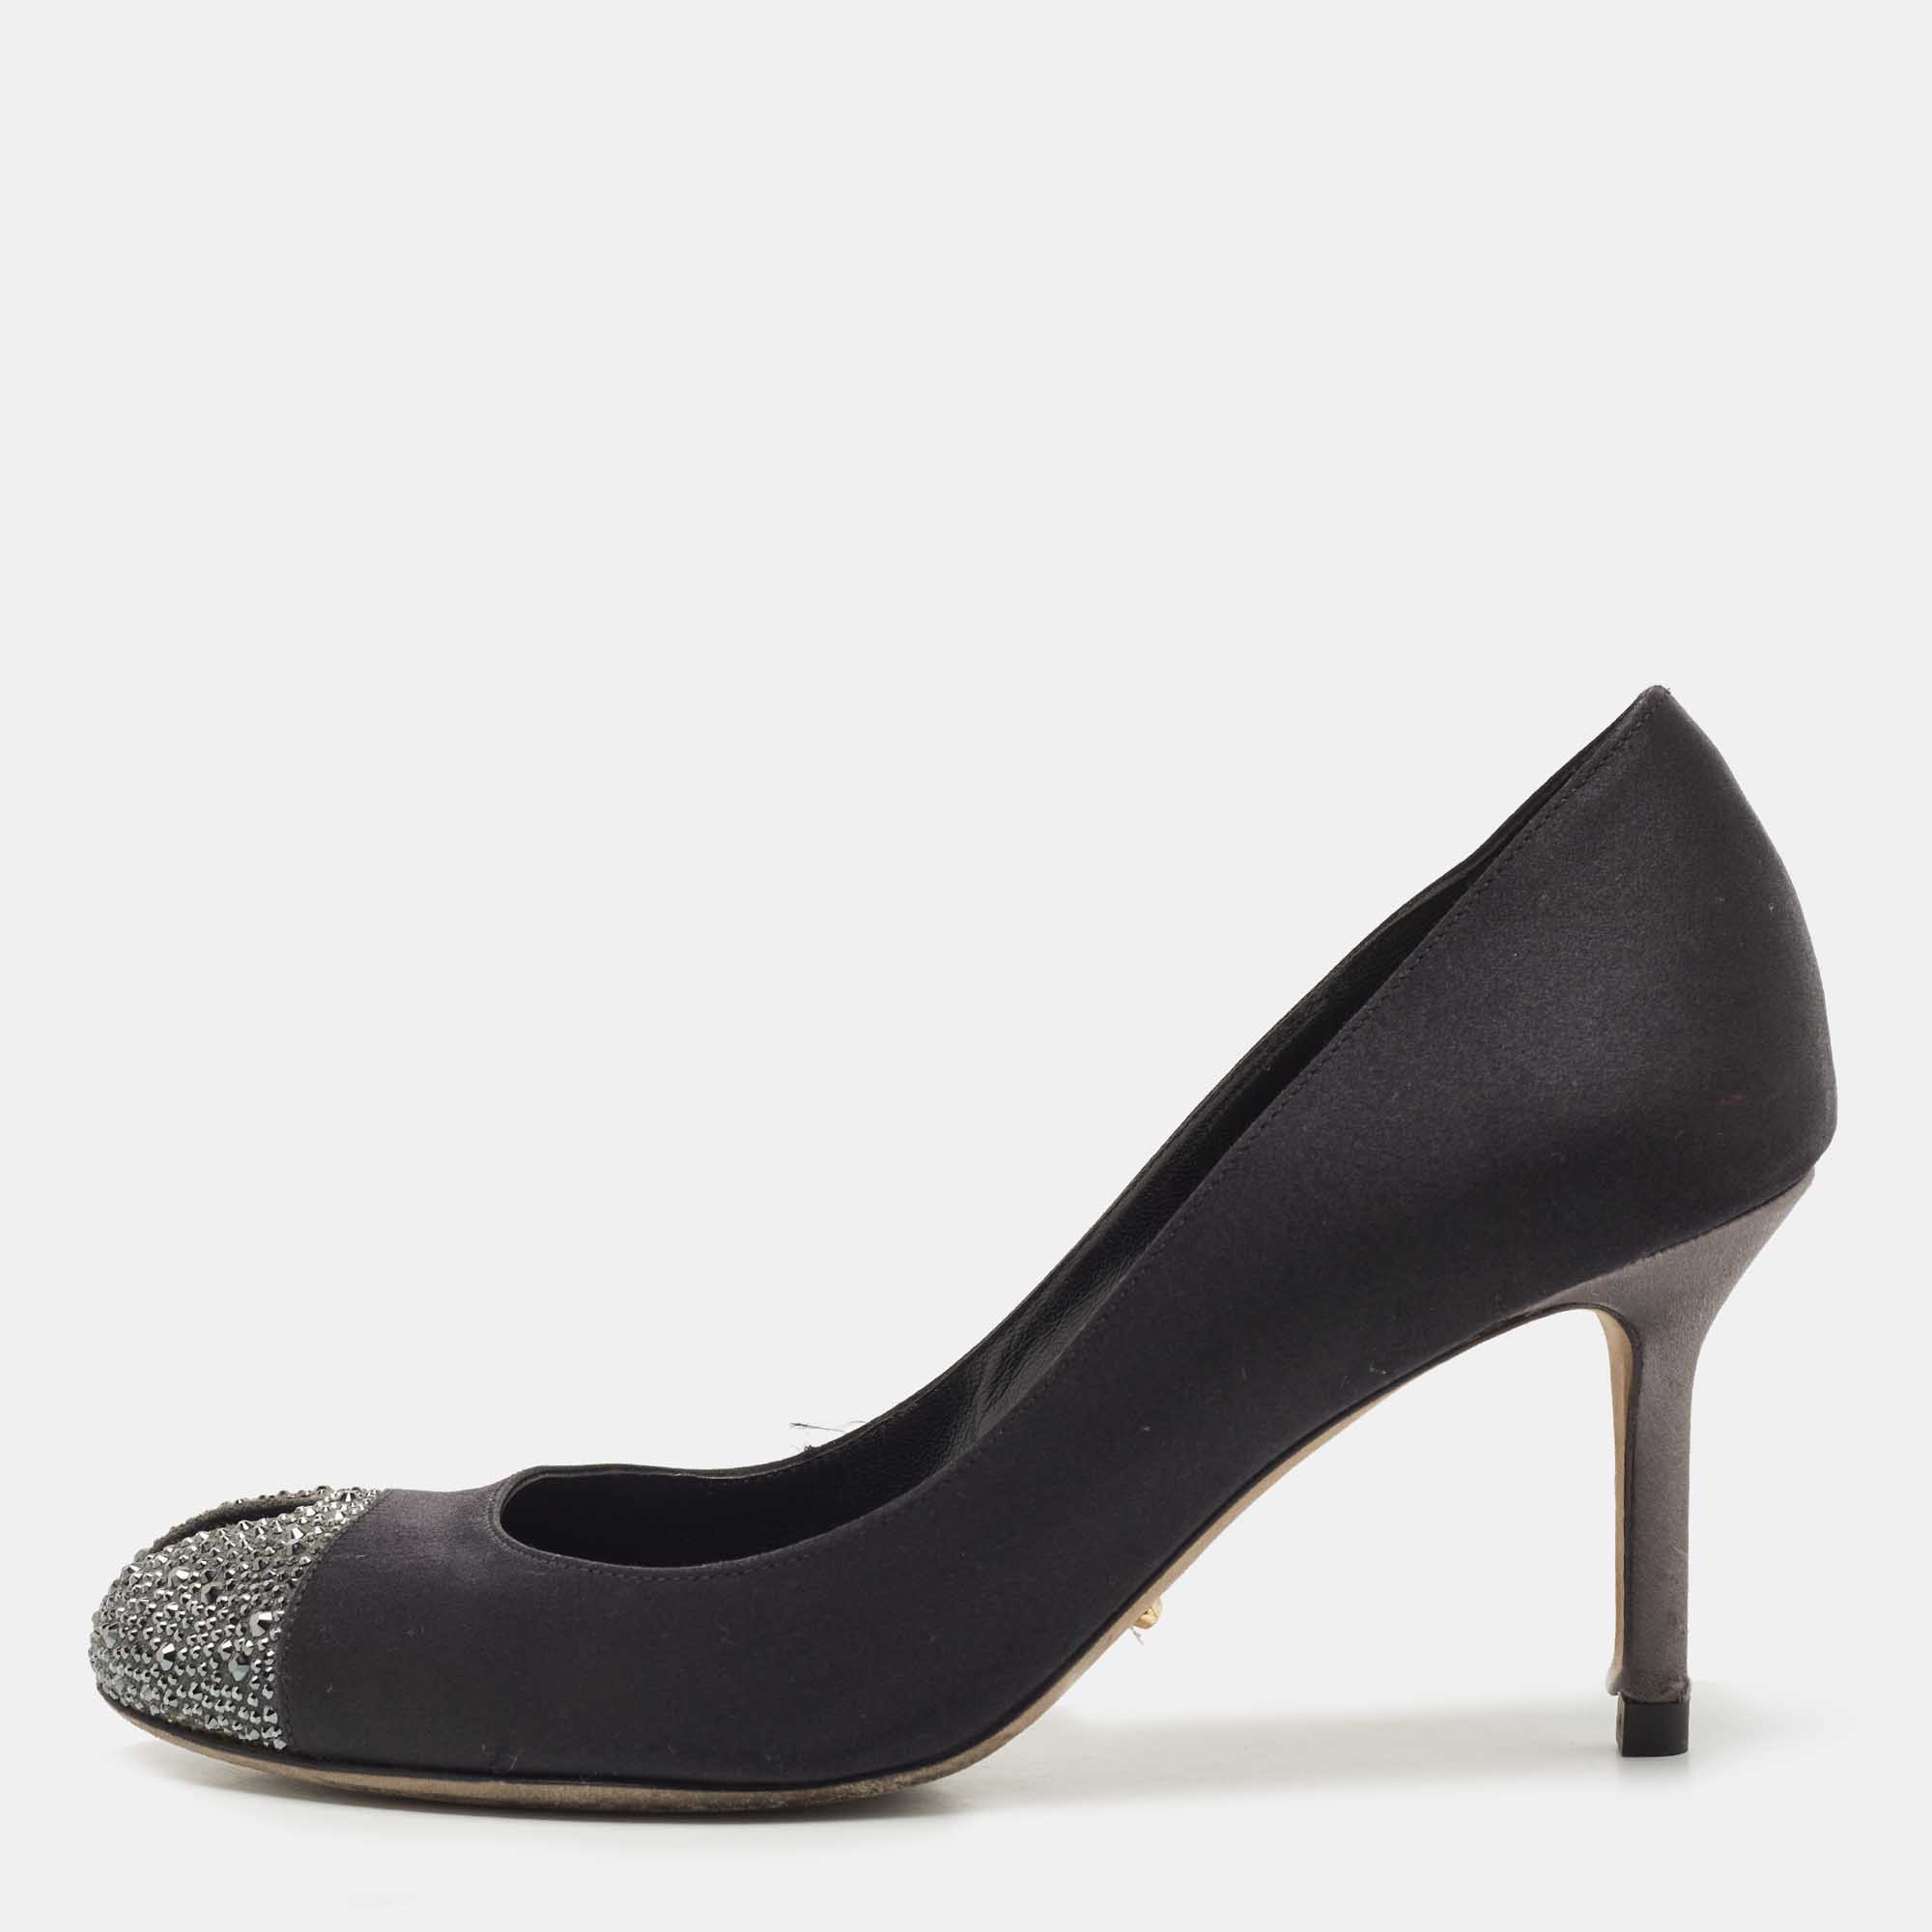 Project an elegant take in a comfortable manner with these timeless pumps by Sergio Rossi. Crafted in Italy from satin in a black shade they feature peep toes and 8cm heels.